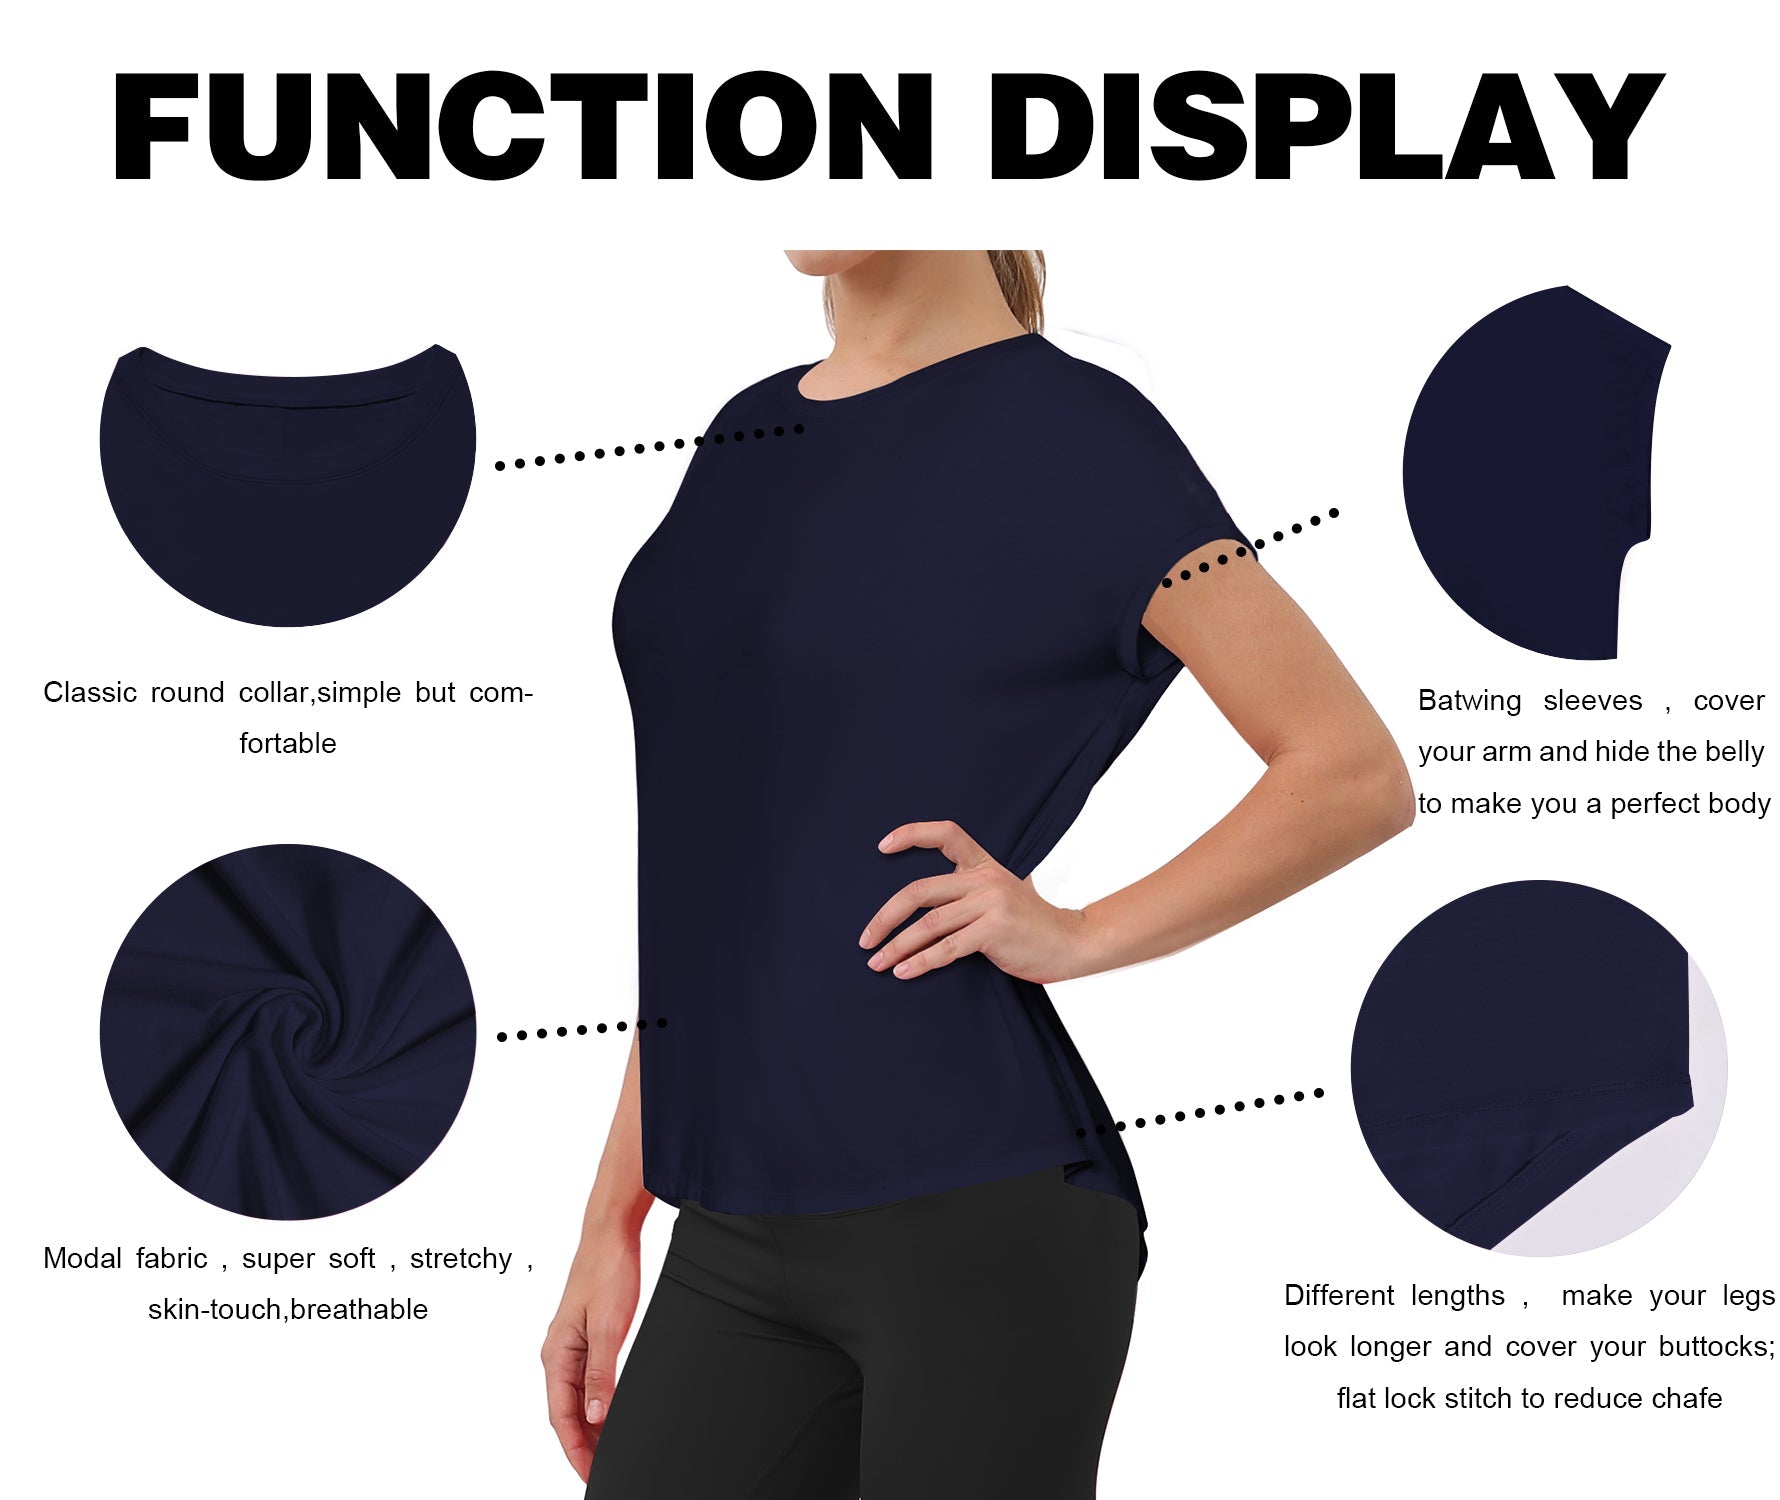 Hip Length Short Sleeve Shirt darknavy 93%Modal/7%Spandex Designed for Pilates Classic Fit, Hip Length An easy fit that floats away from your body Sits below the waistband for moderate, everyday coverage Lightweight, elastic, strong fabric for moisture absorption and perspiration, sports and fitness clothing.